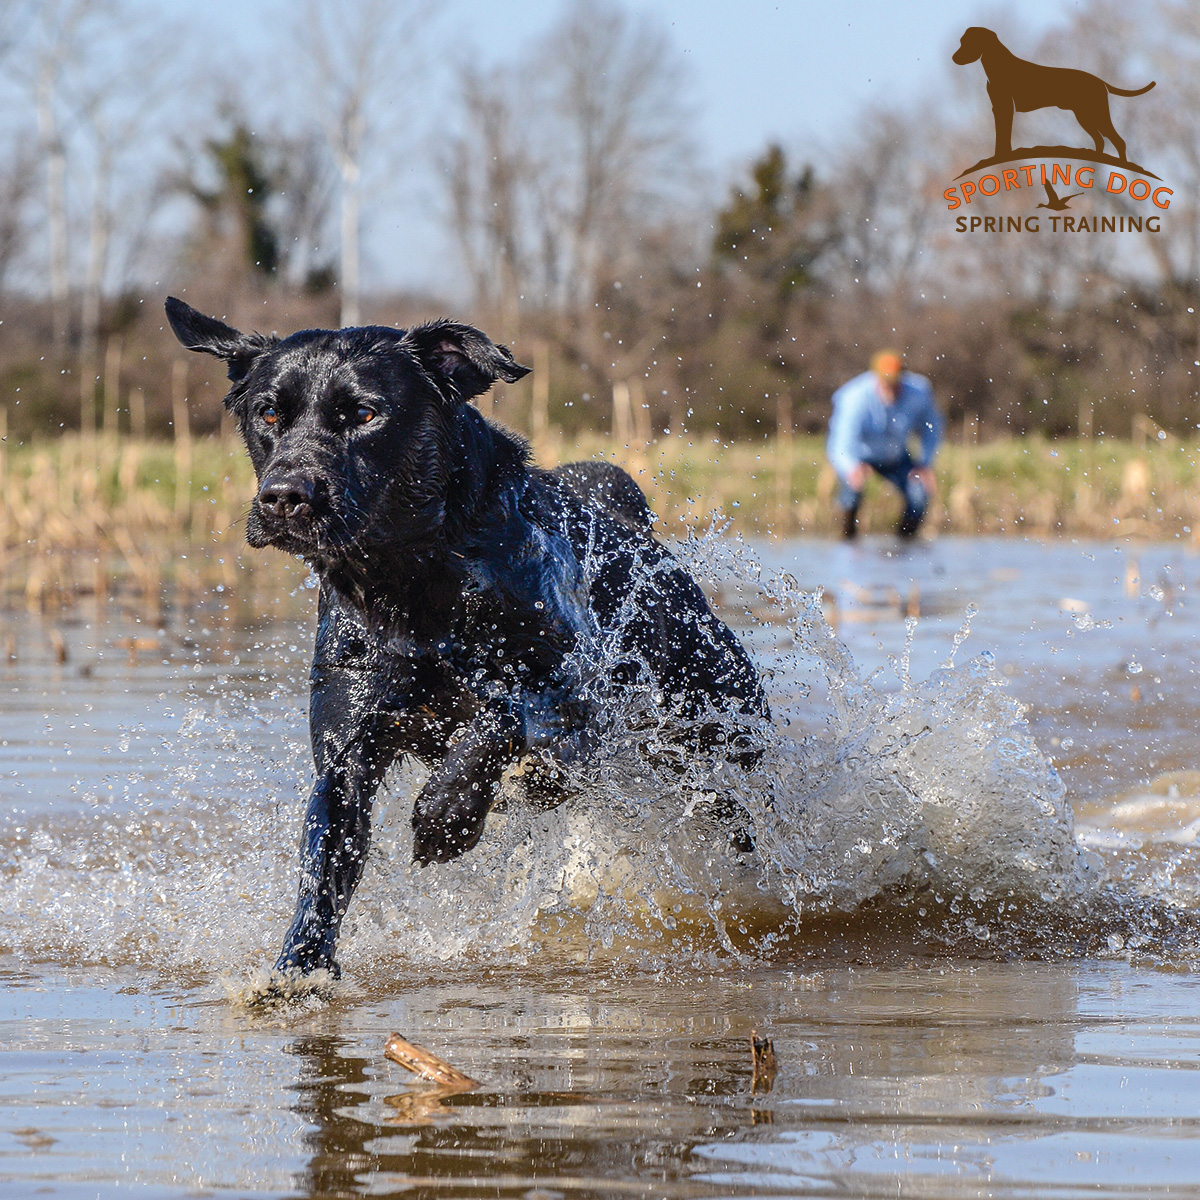 Sporting Dog Spring Training: The ultimate resource for you and your four-legged companion. May is the perfect time to fine-tune your retriever's abilities, and we will provide the tools to do so. Follow along as tips, tactics, and much more are promoted through this program to…